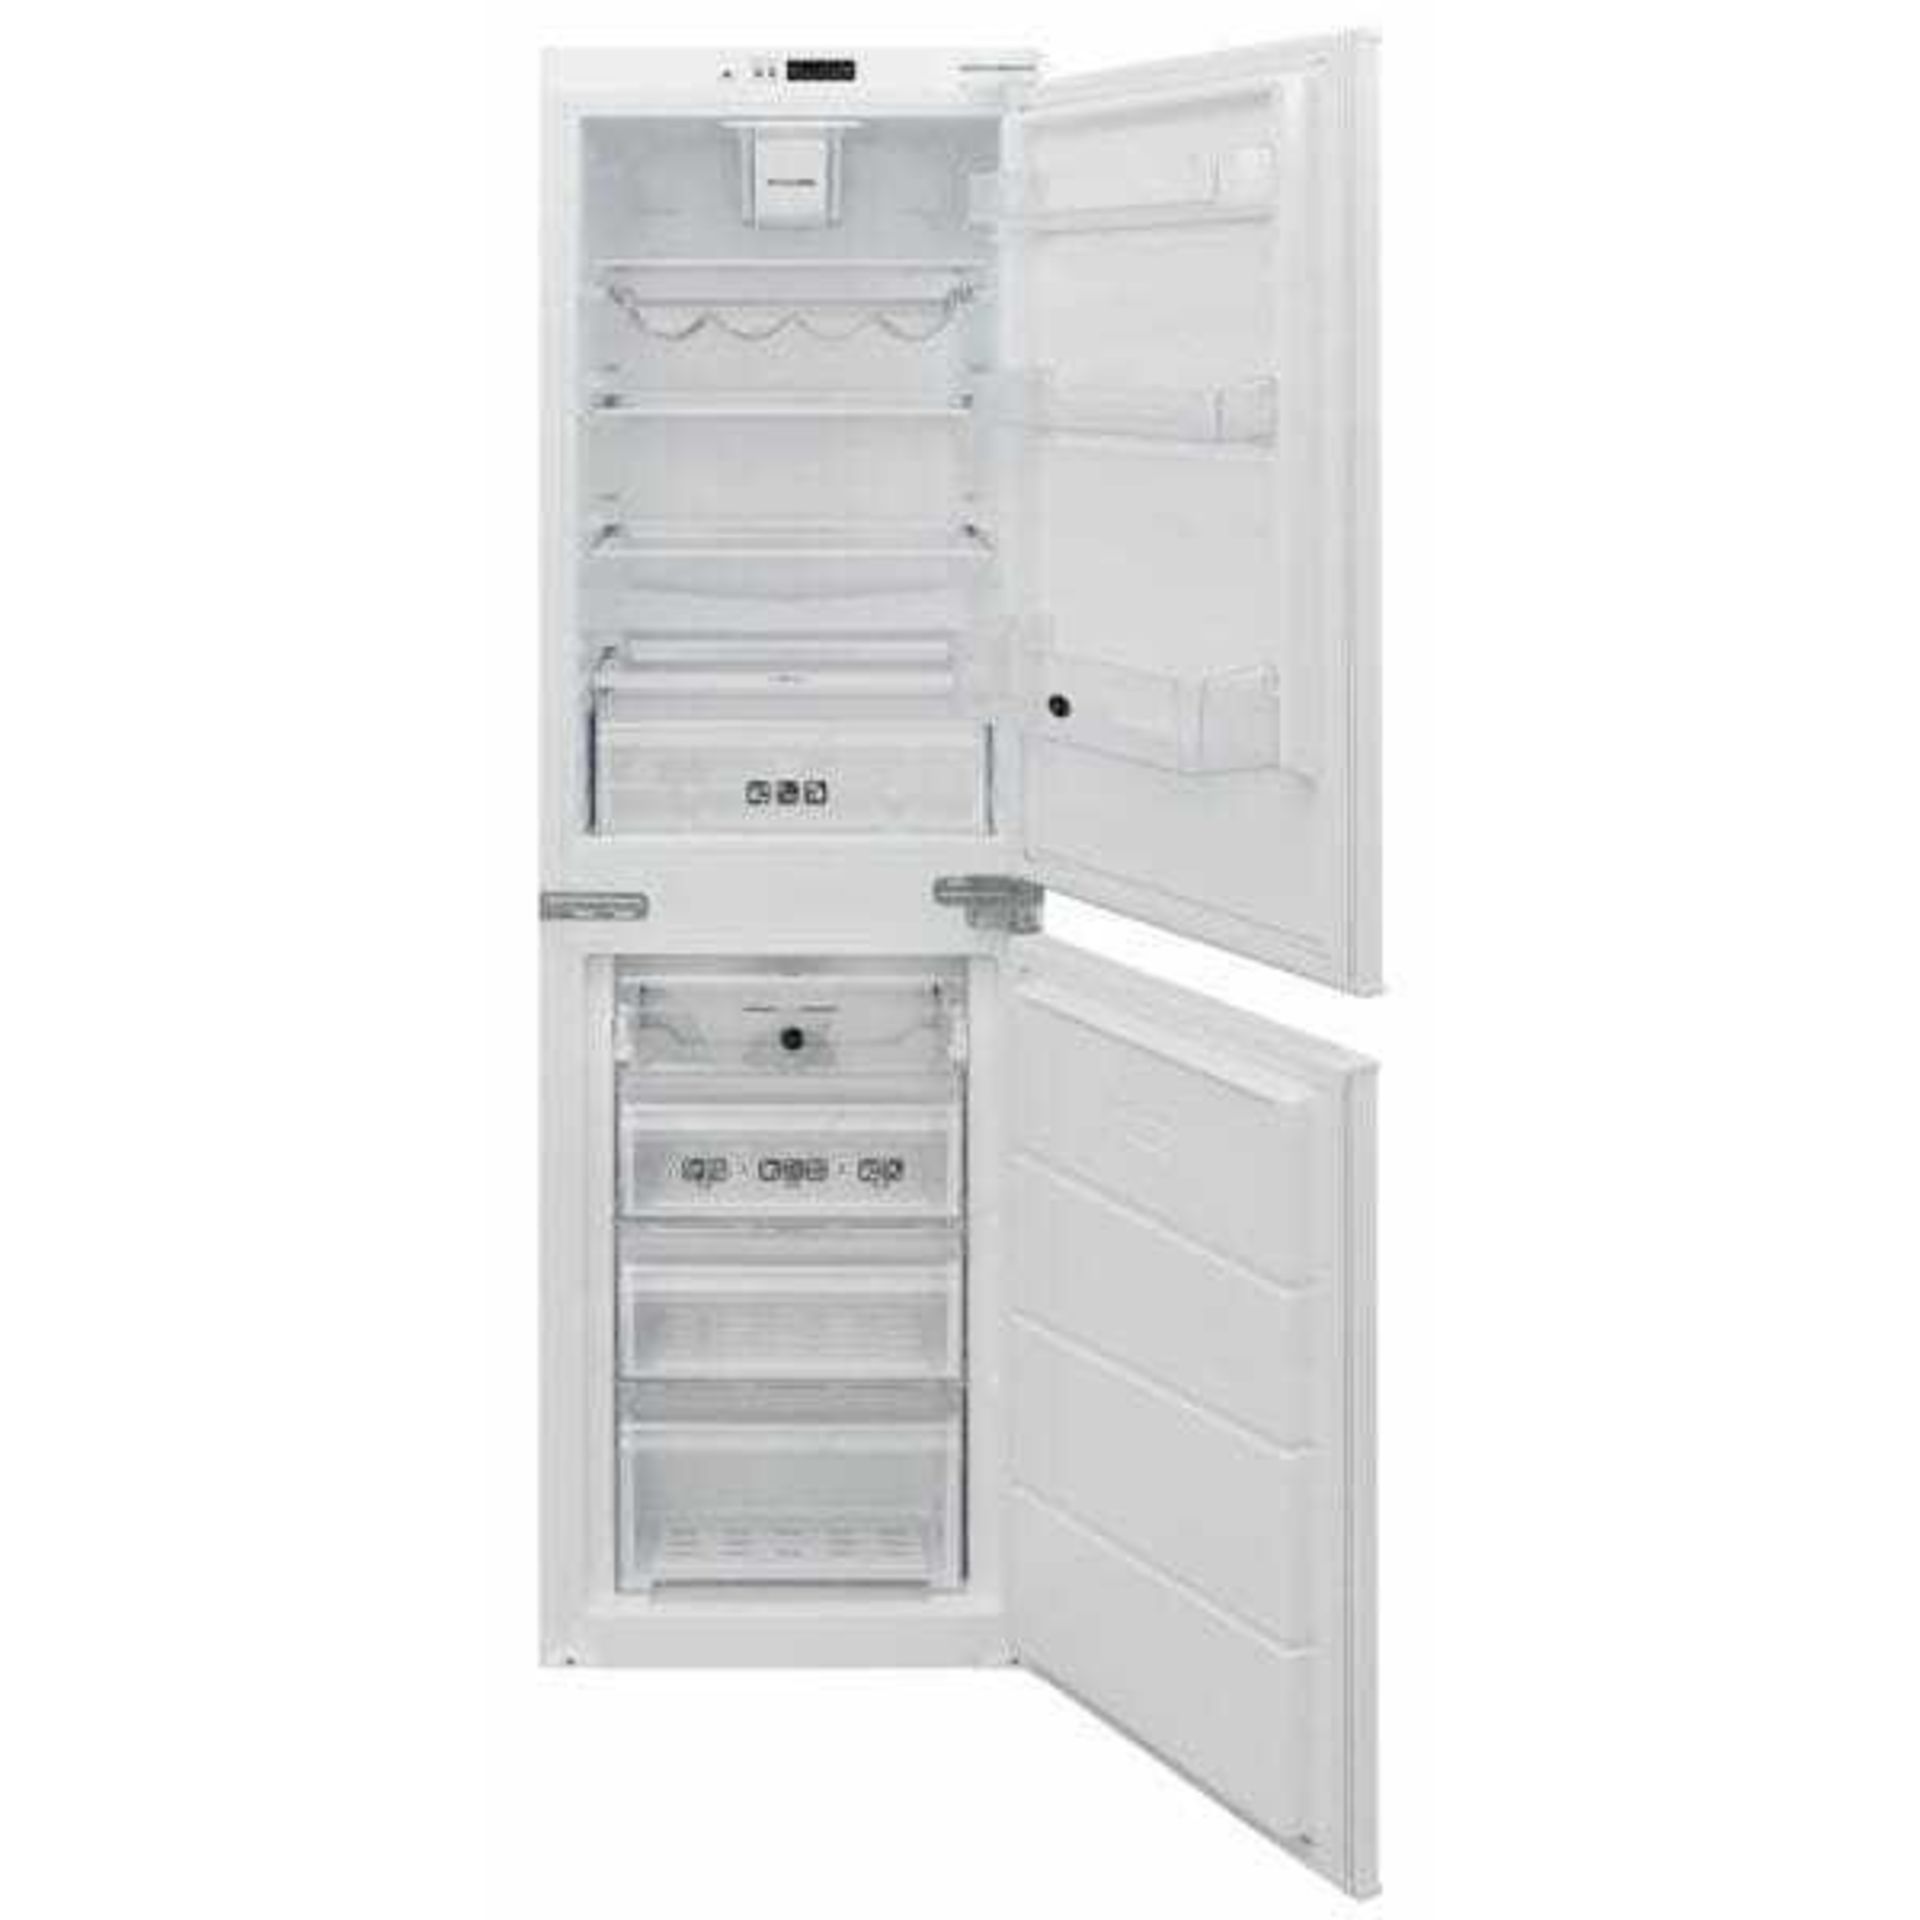 (Kw) RRP £290 Lot To Contain X1 Integrated Fridge Freezer, Unboxed